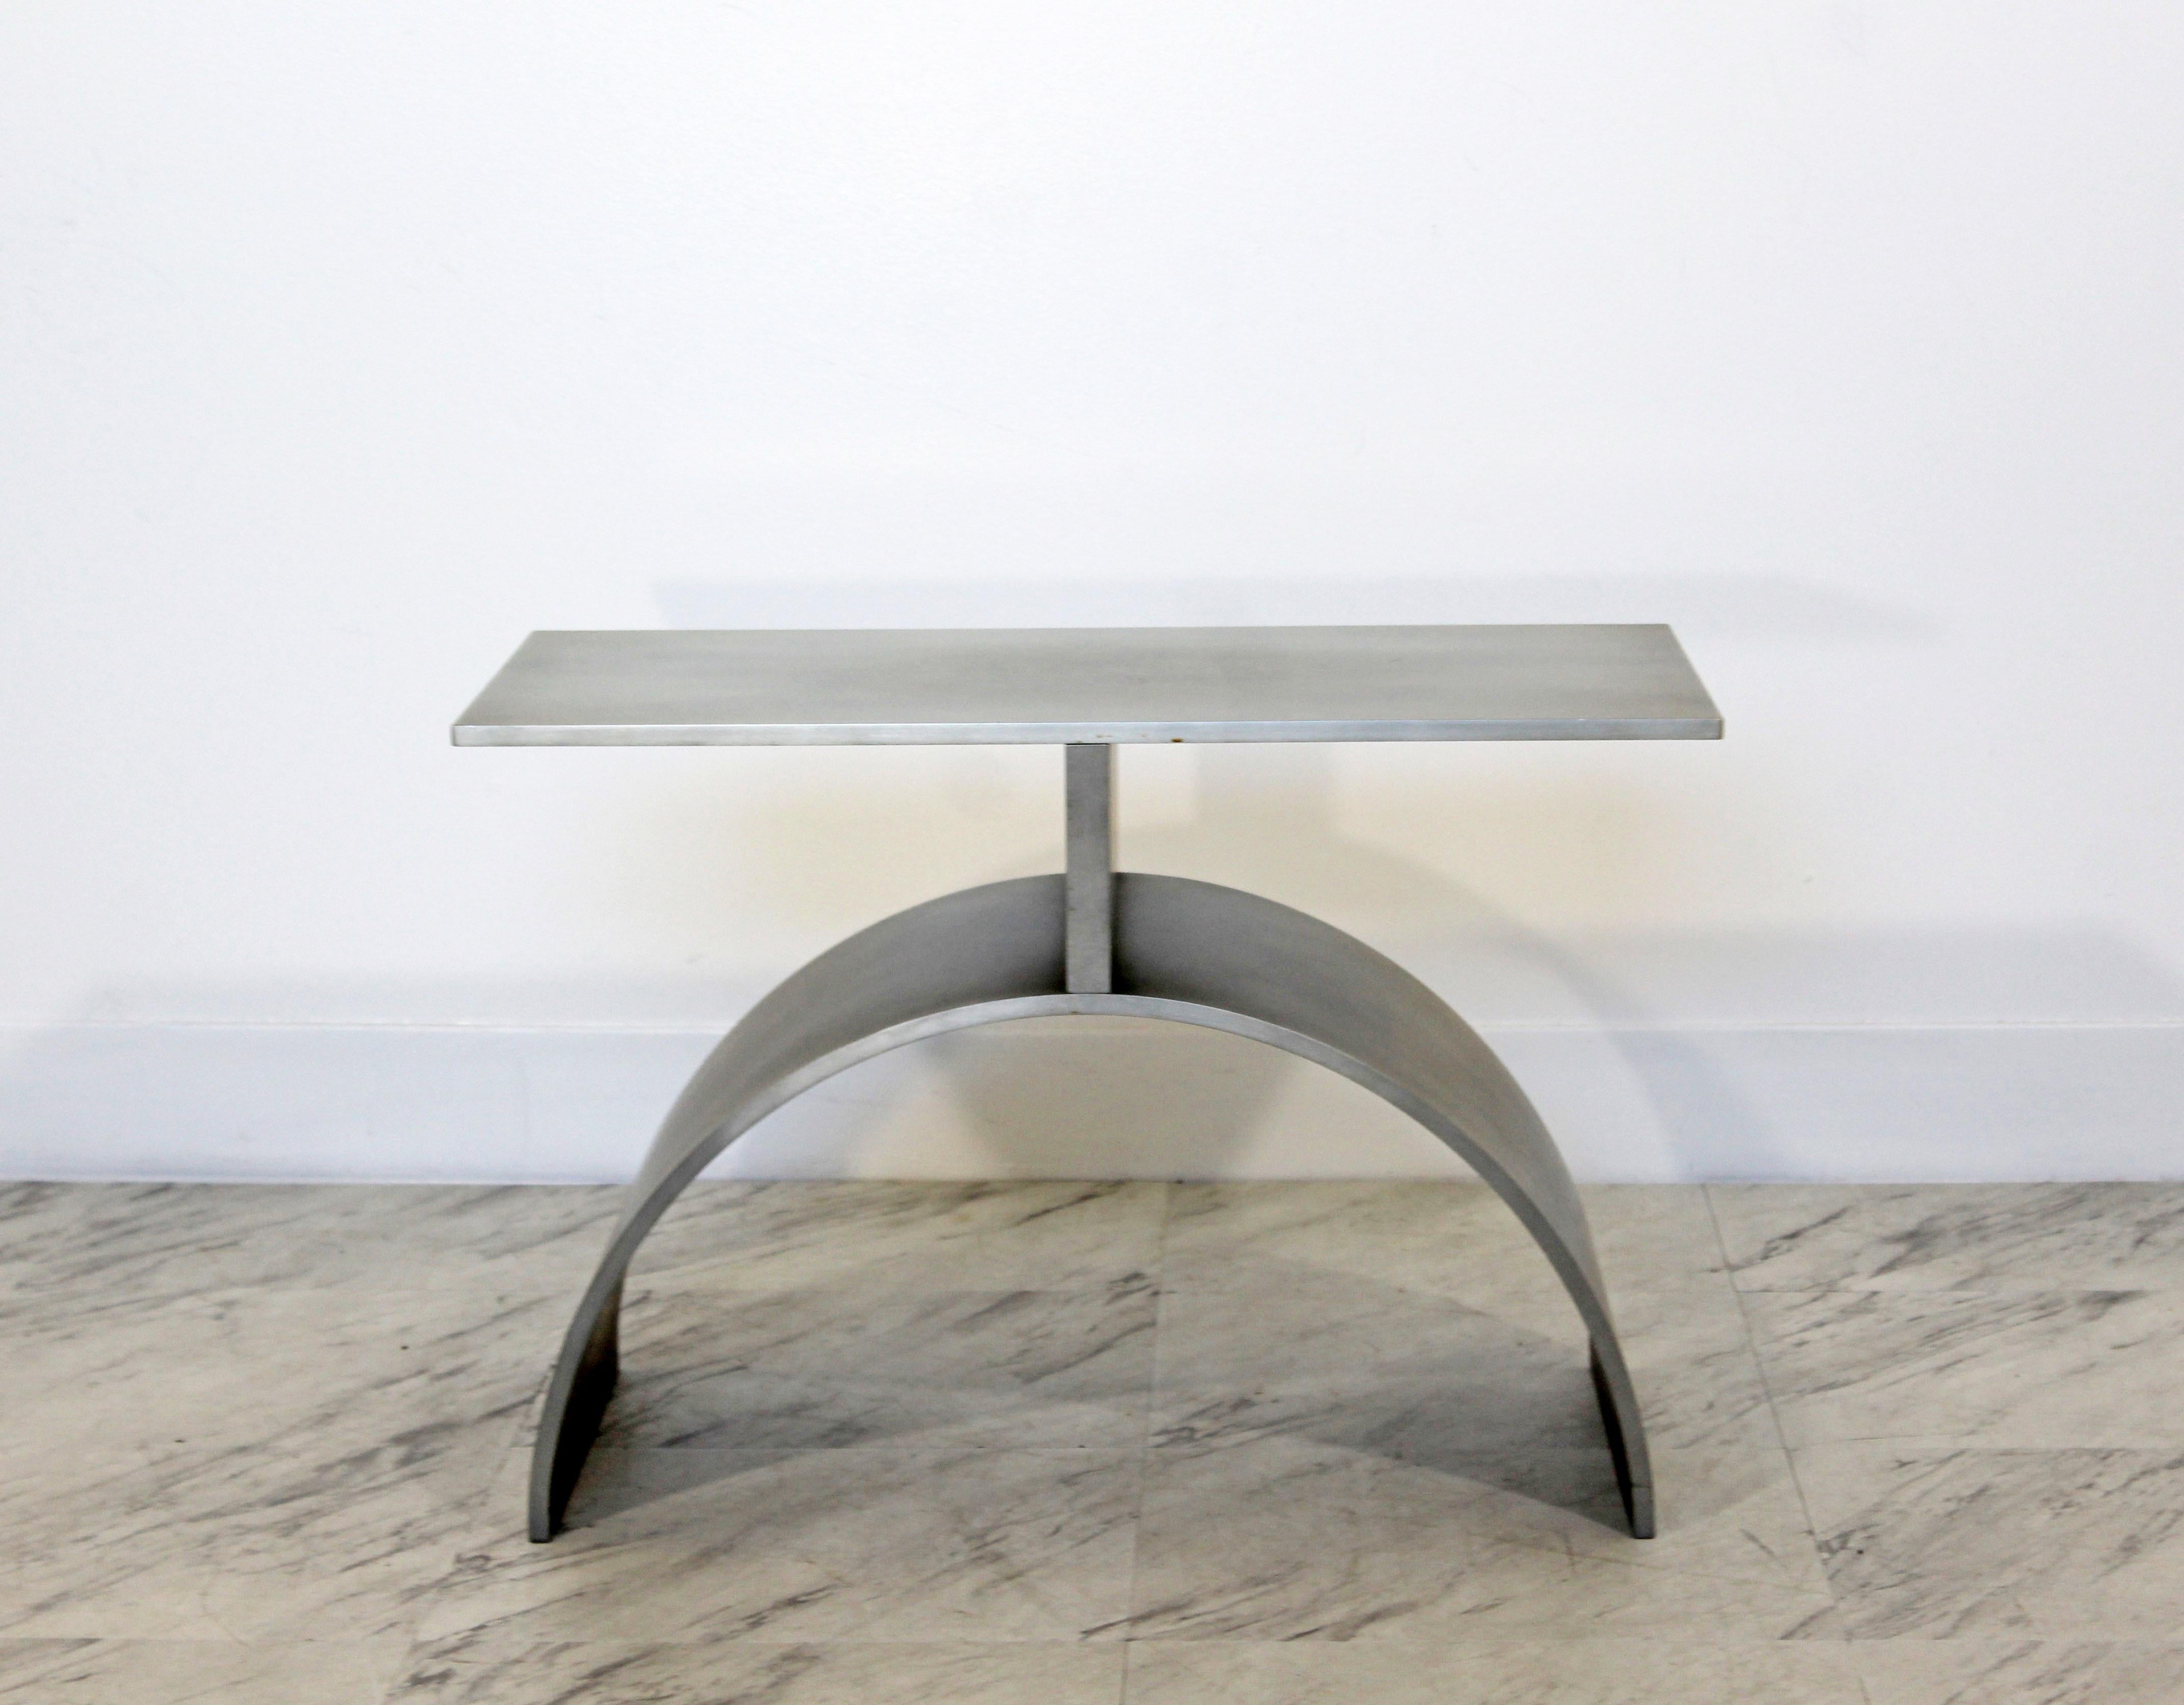 For your consideration is a stunning, brushed aluminum side or end table, attributed to Jonathan Nesci. In excellent condition. The dimensions are 22